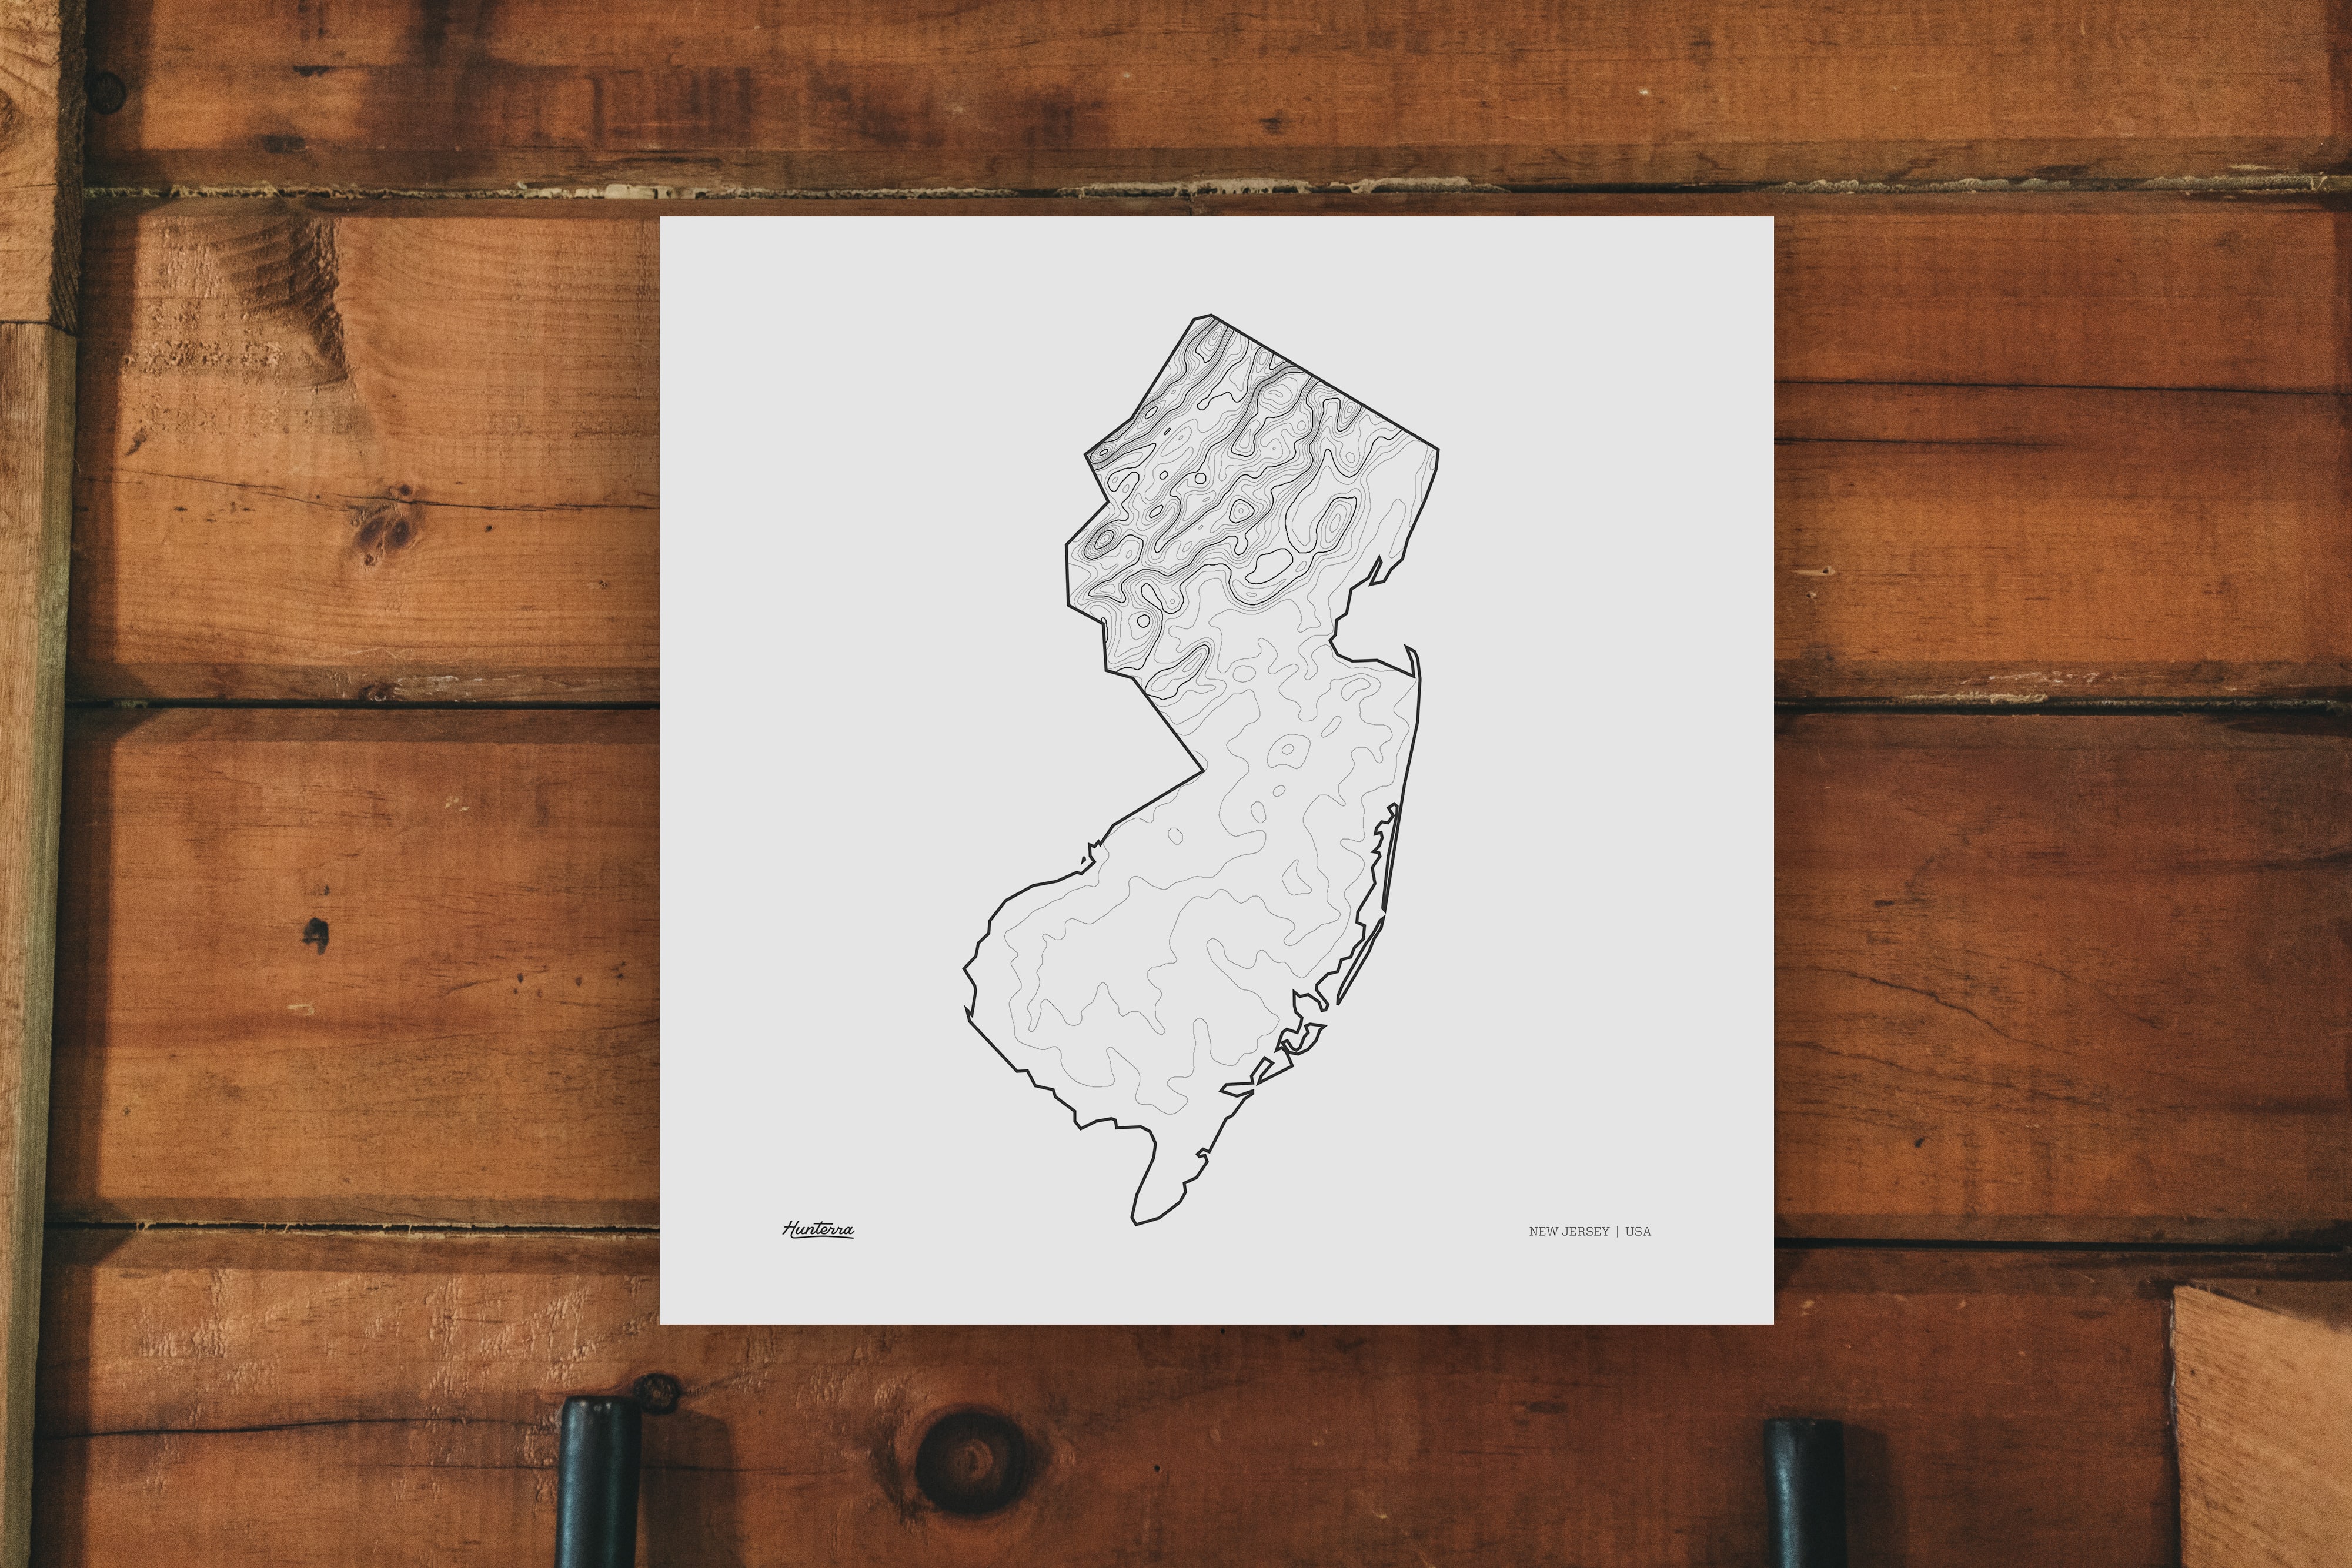 New Jersey Topo Map